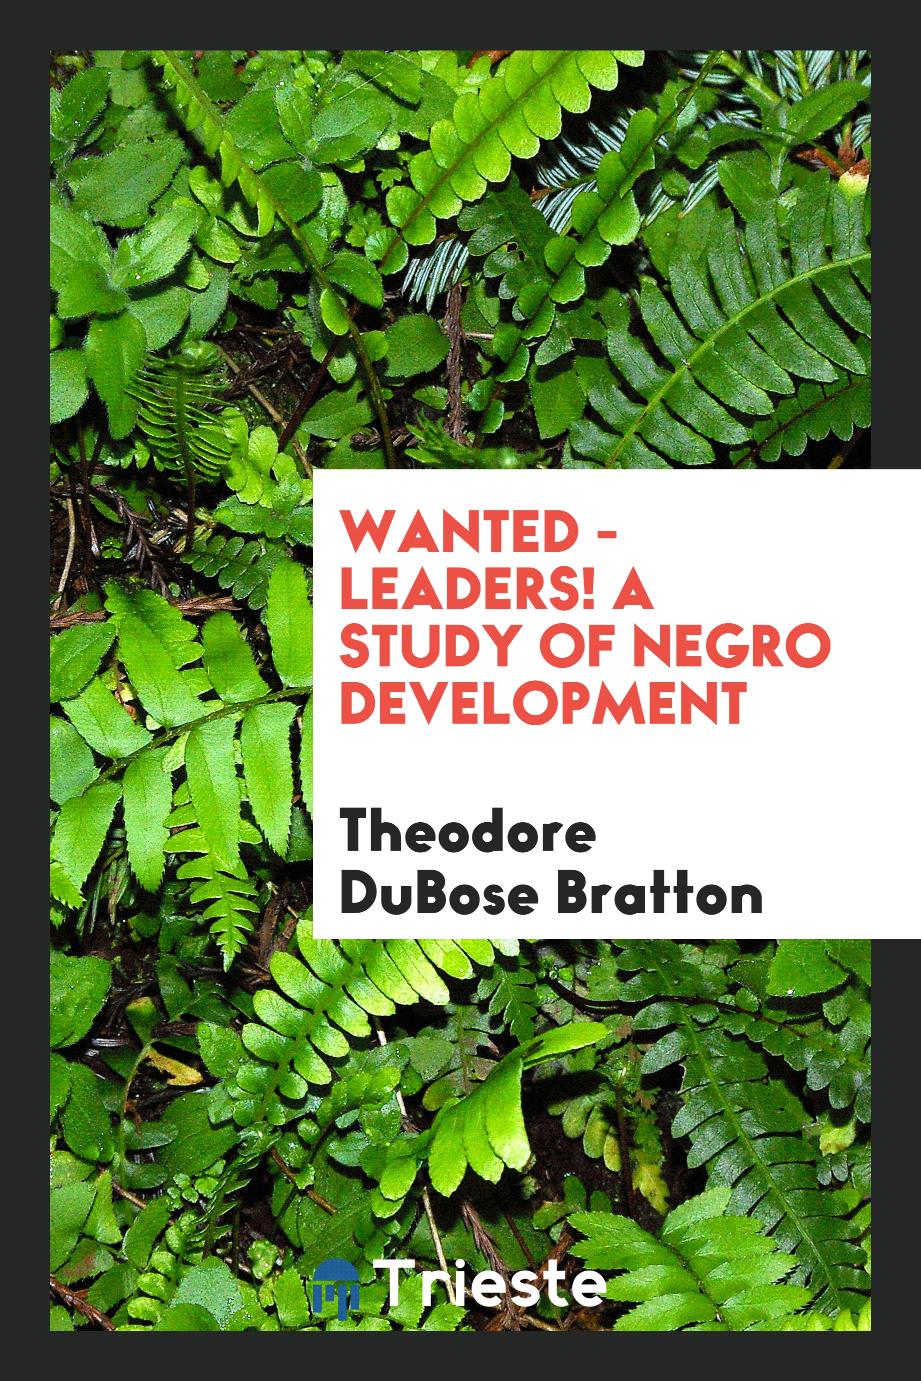 Wanted - leaders! A study of Negro development